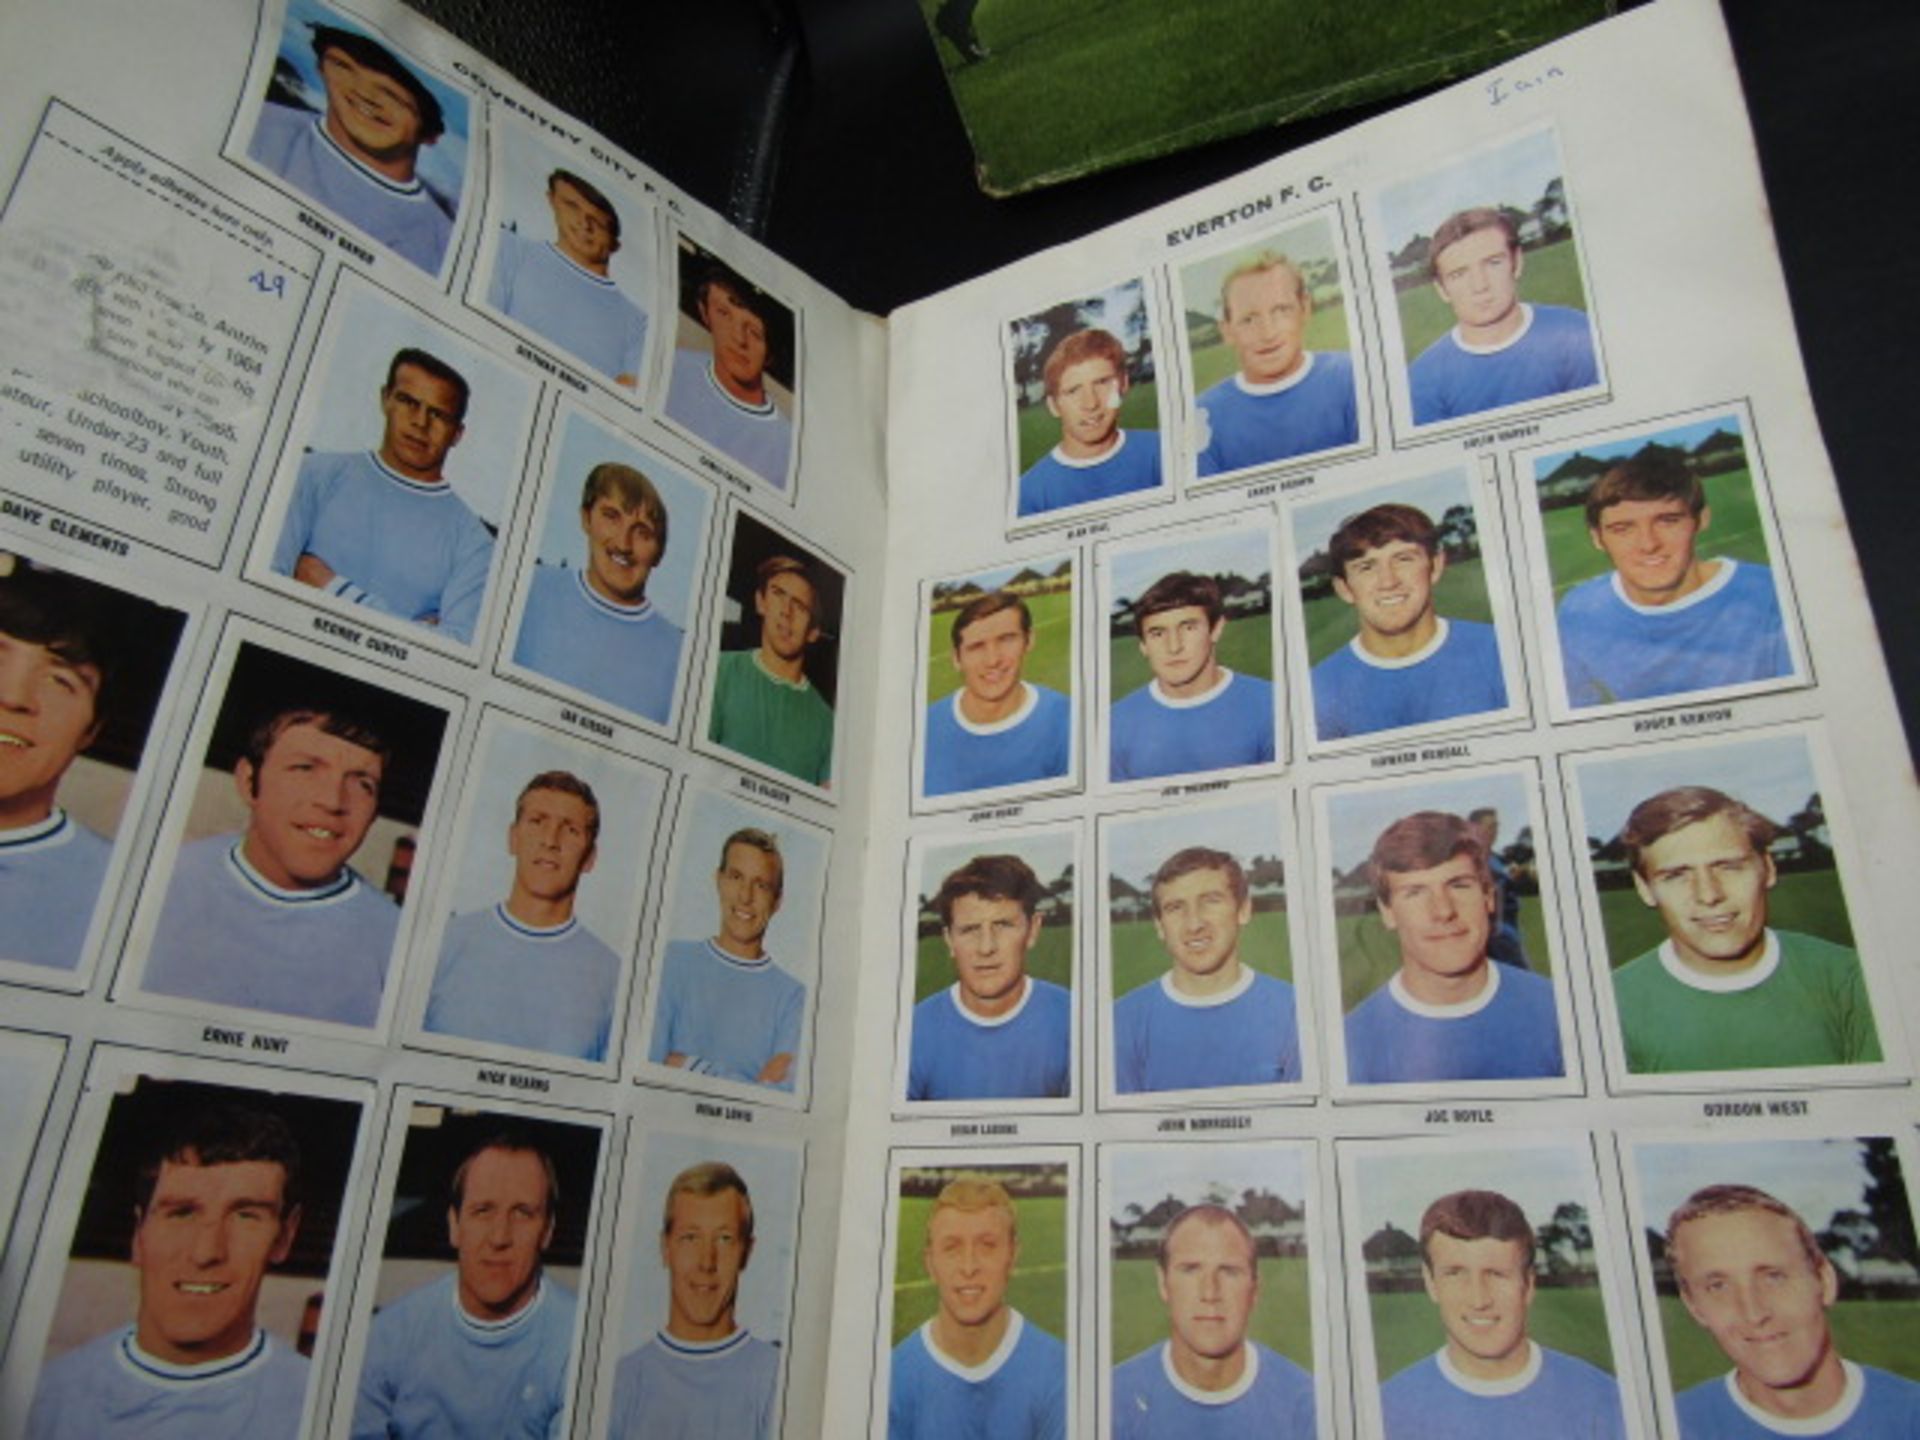 Leeds football shirt, Norwich City autograph sheet 1971-2 plus album picture stamp album and - Image 7 of 16